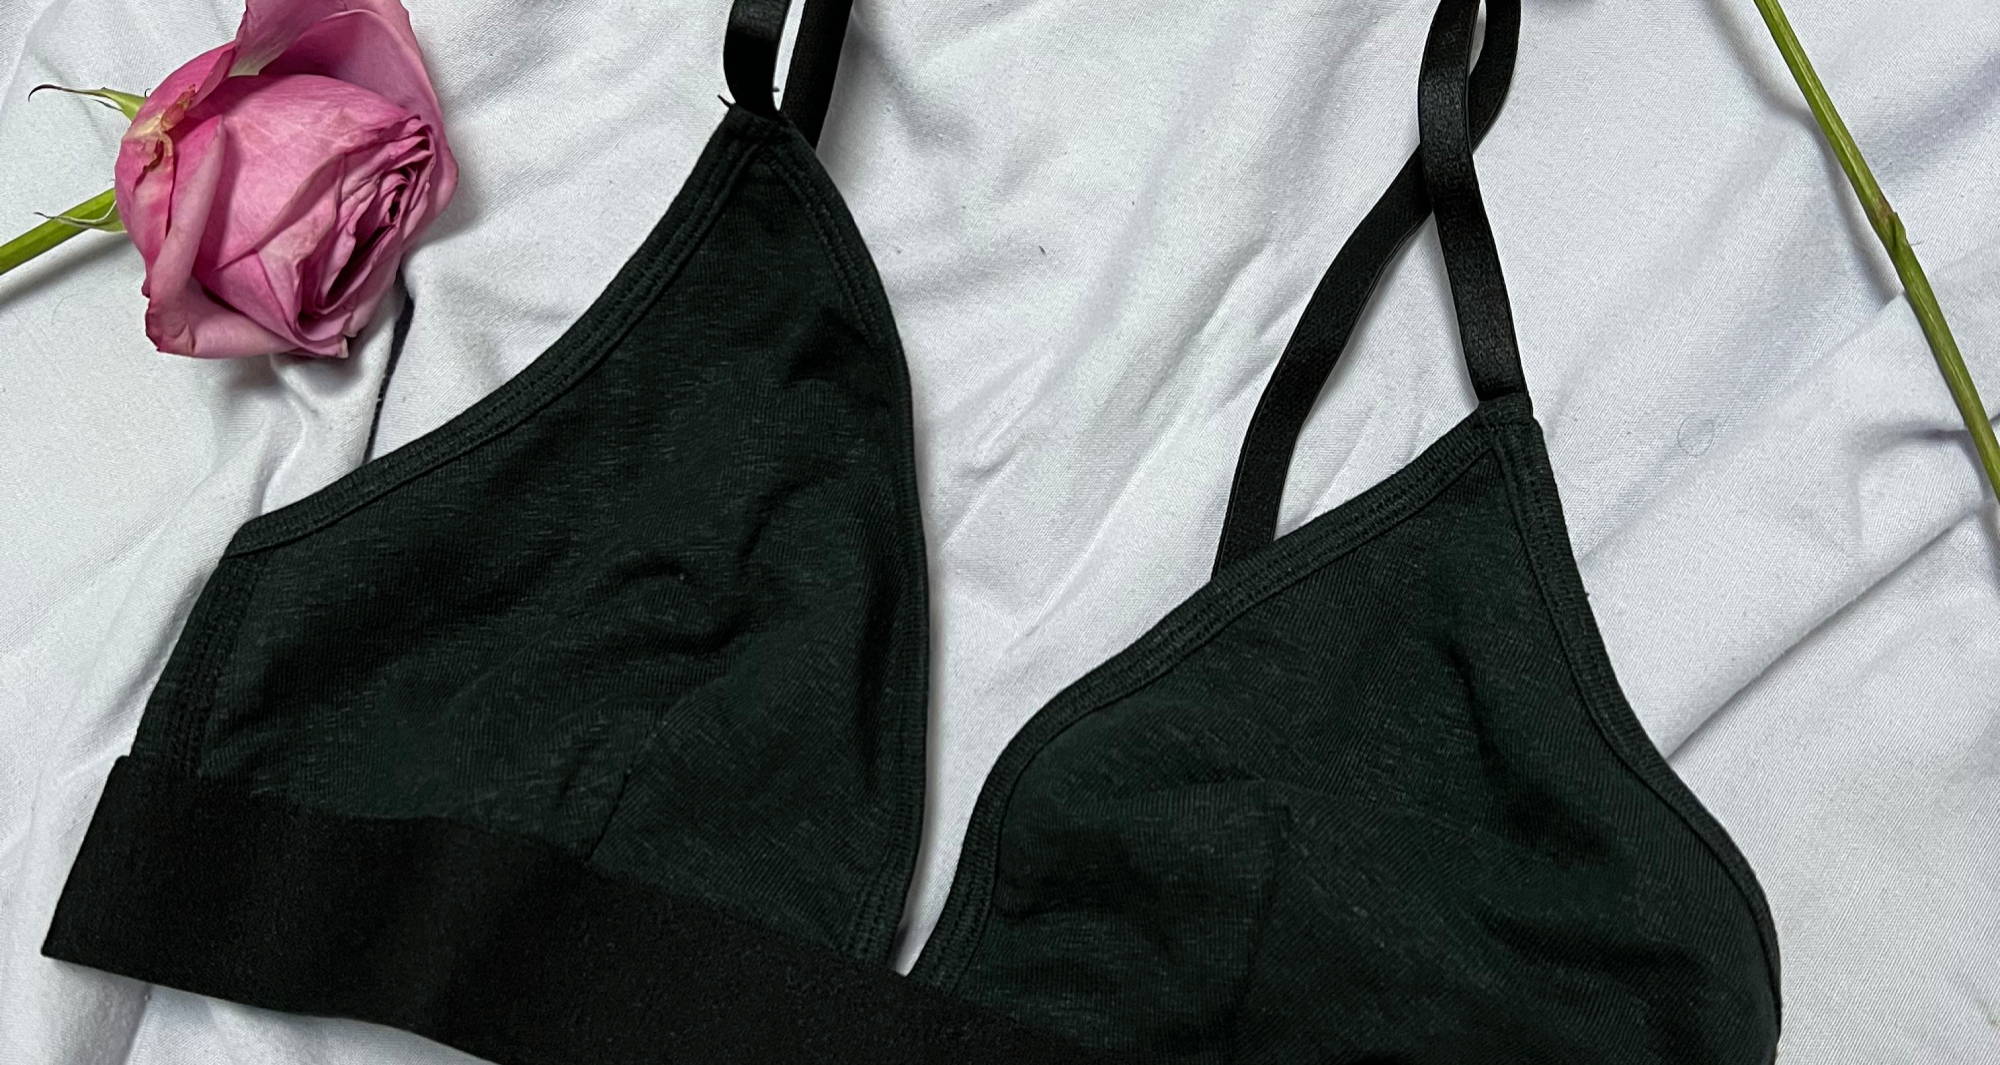 black triangle bralette lays next to dried rose on white comforter